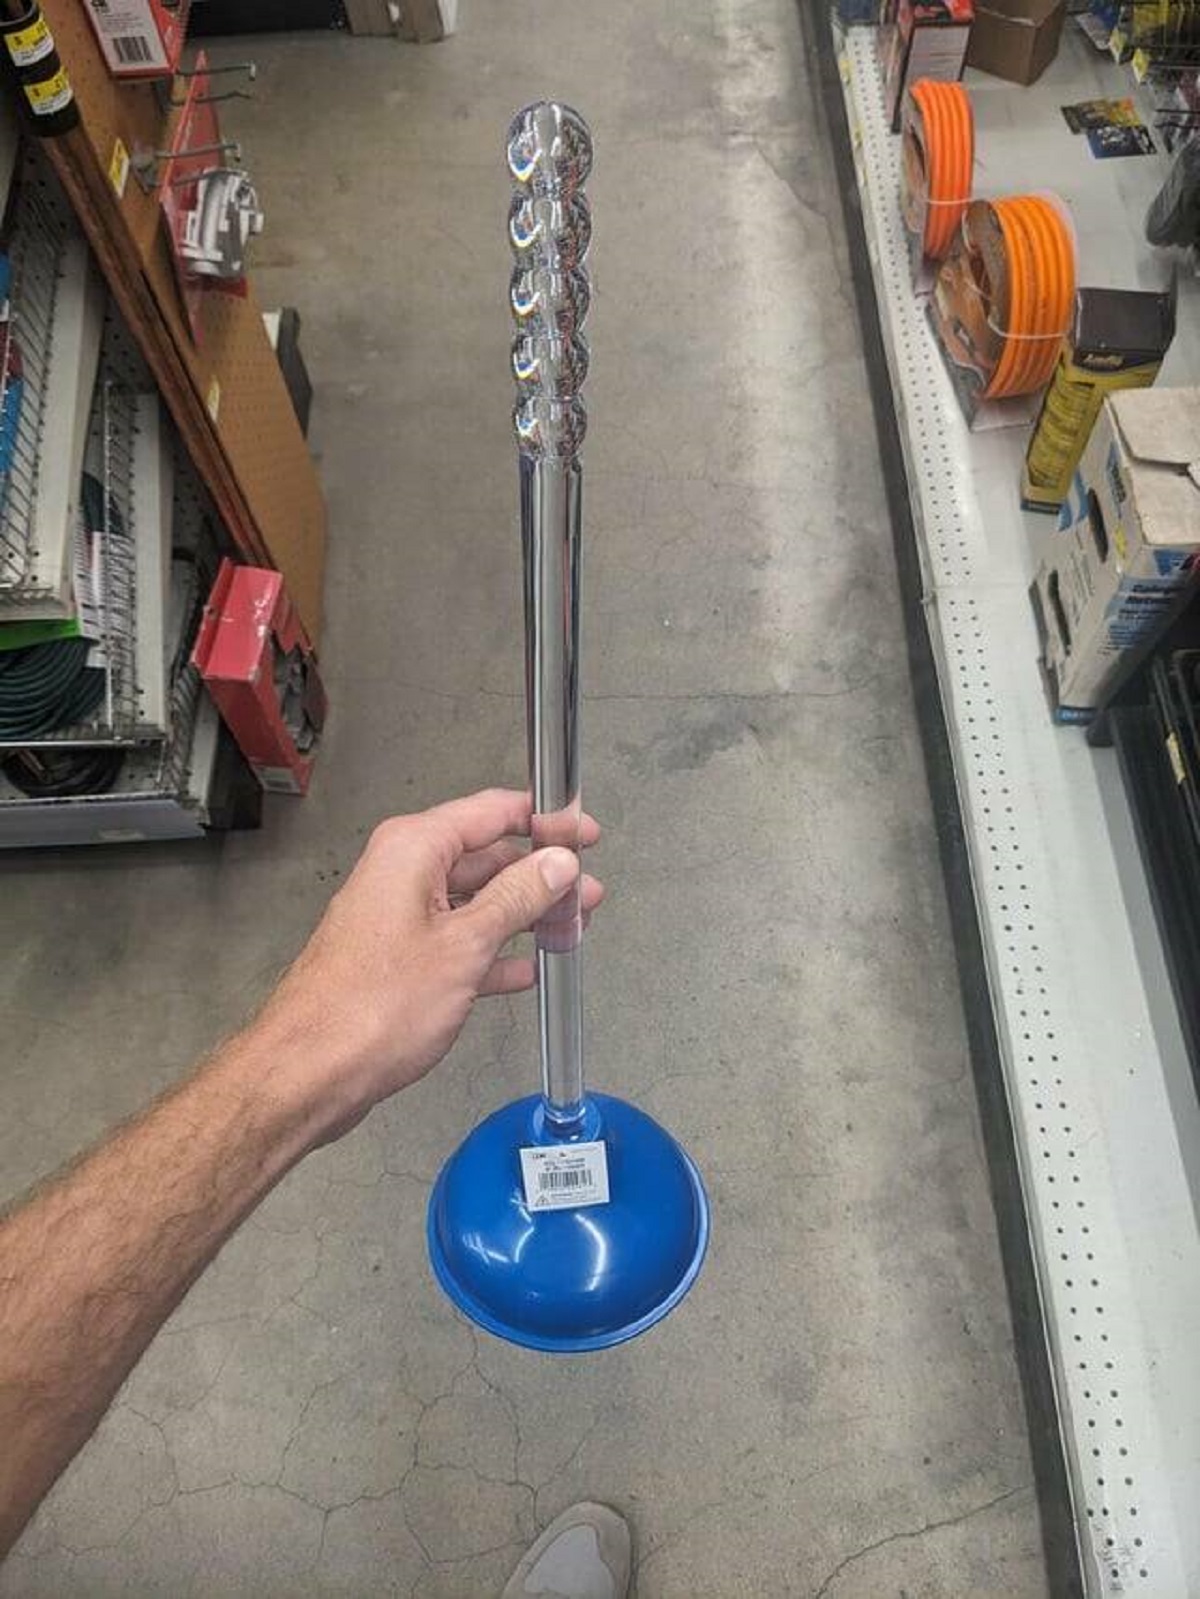 "Curious handle design on this plunger"